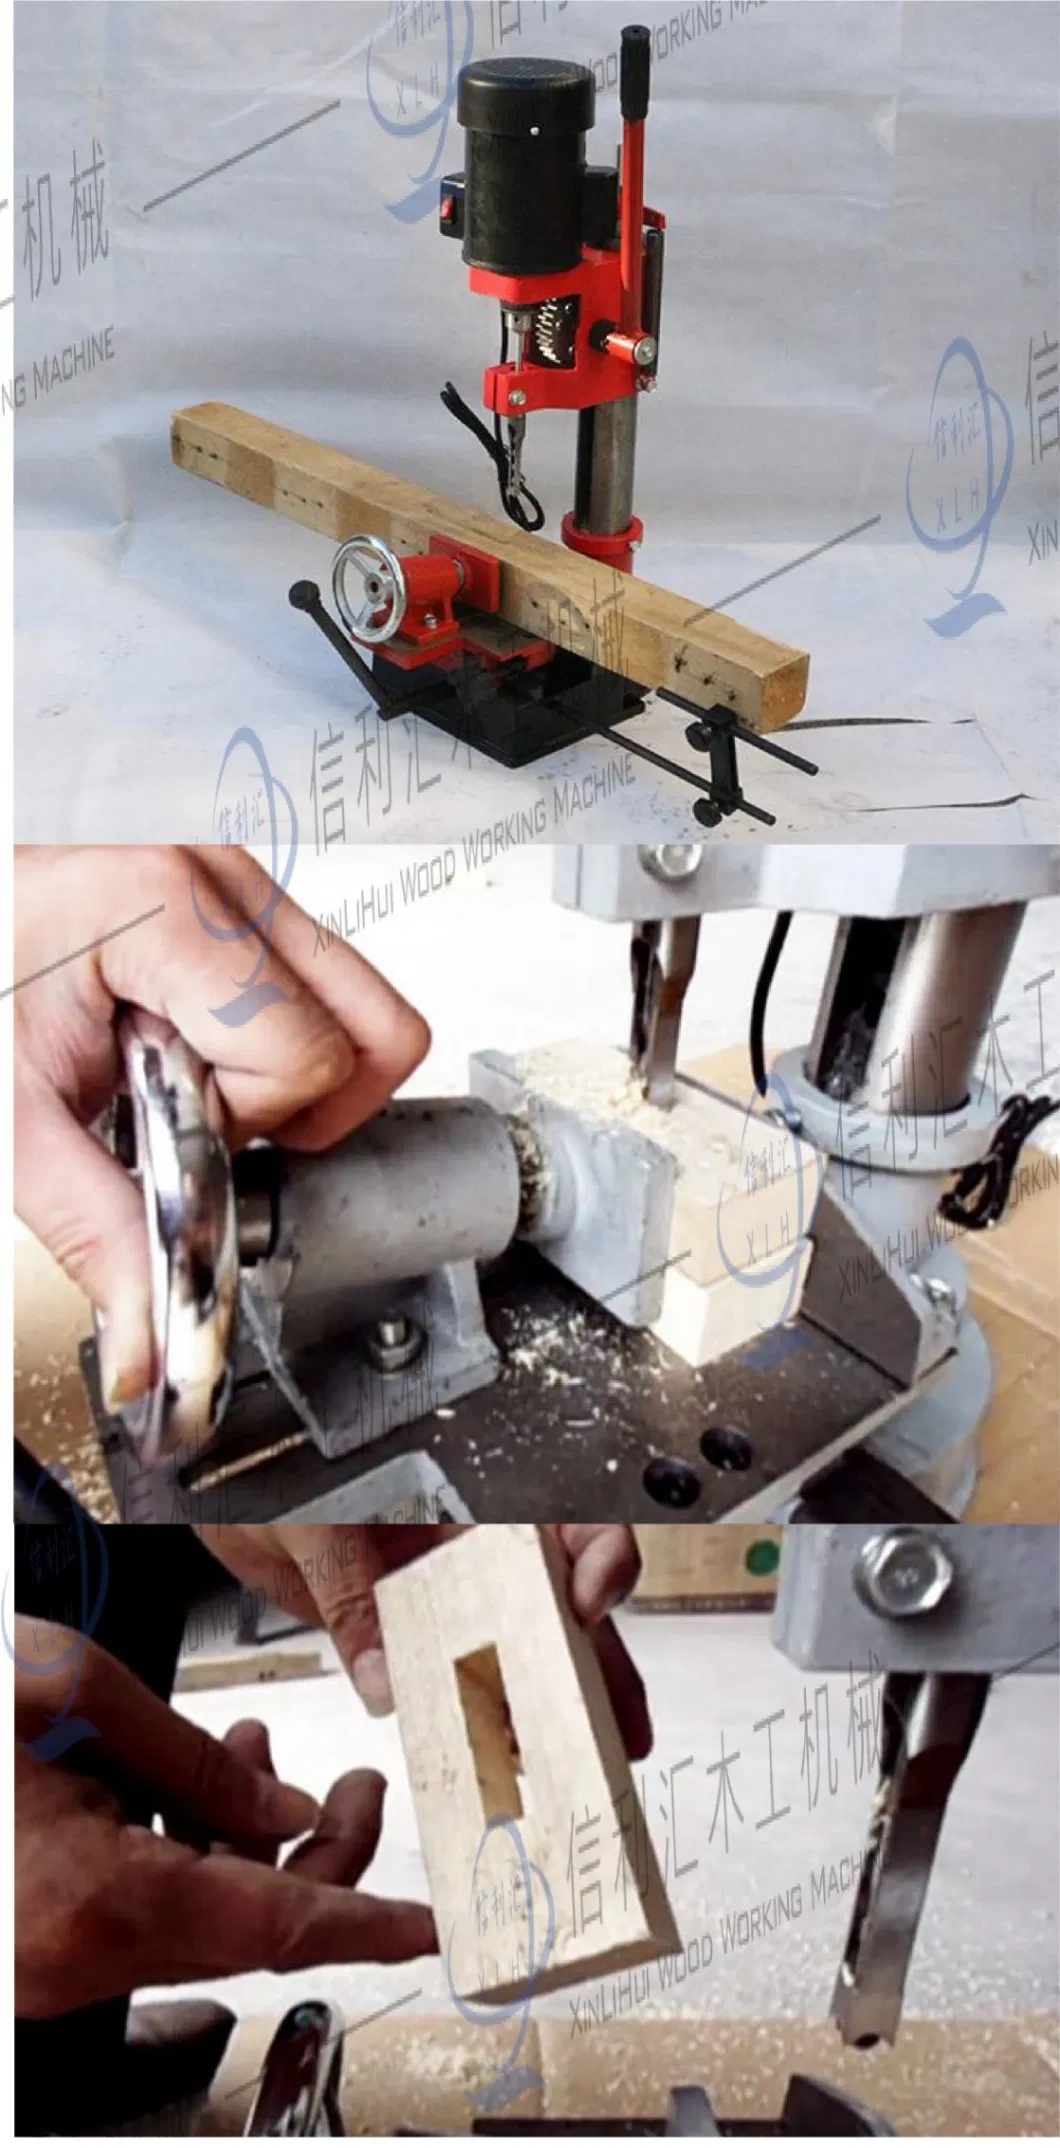 Special Machine Tool for Cutting The Square L or Long Raft at The Joint of Wooden Parts. It Is an Ideal Tool for The Wood Processing Industry